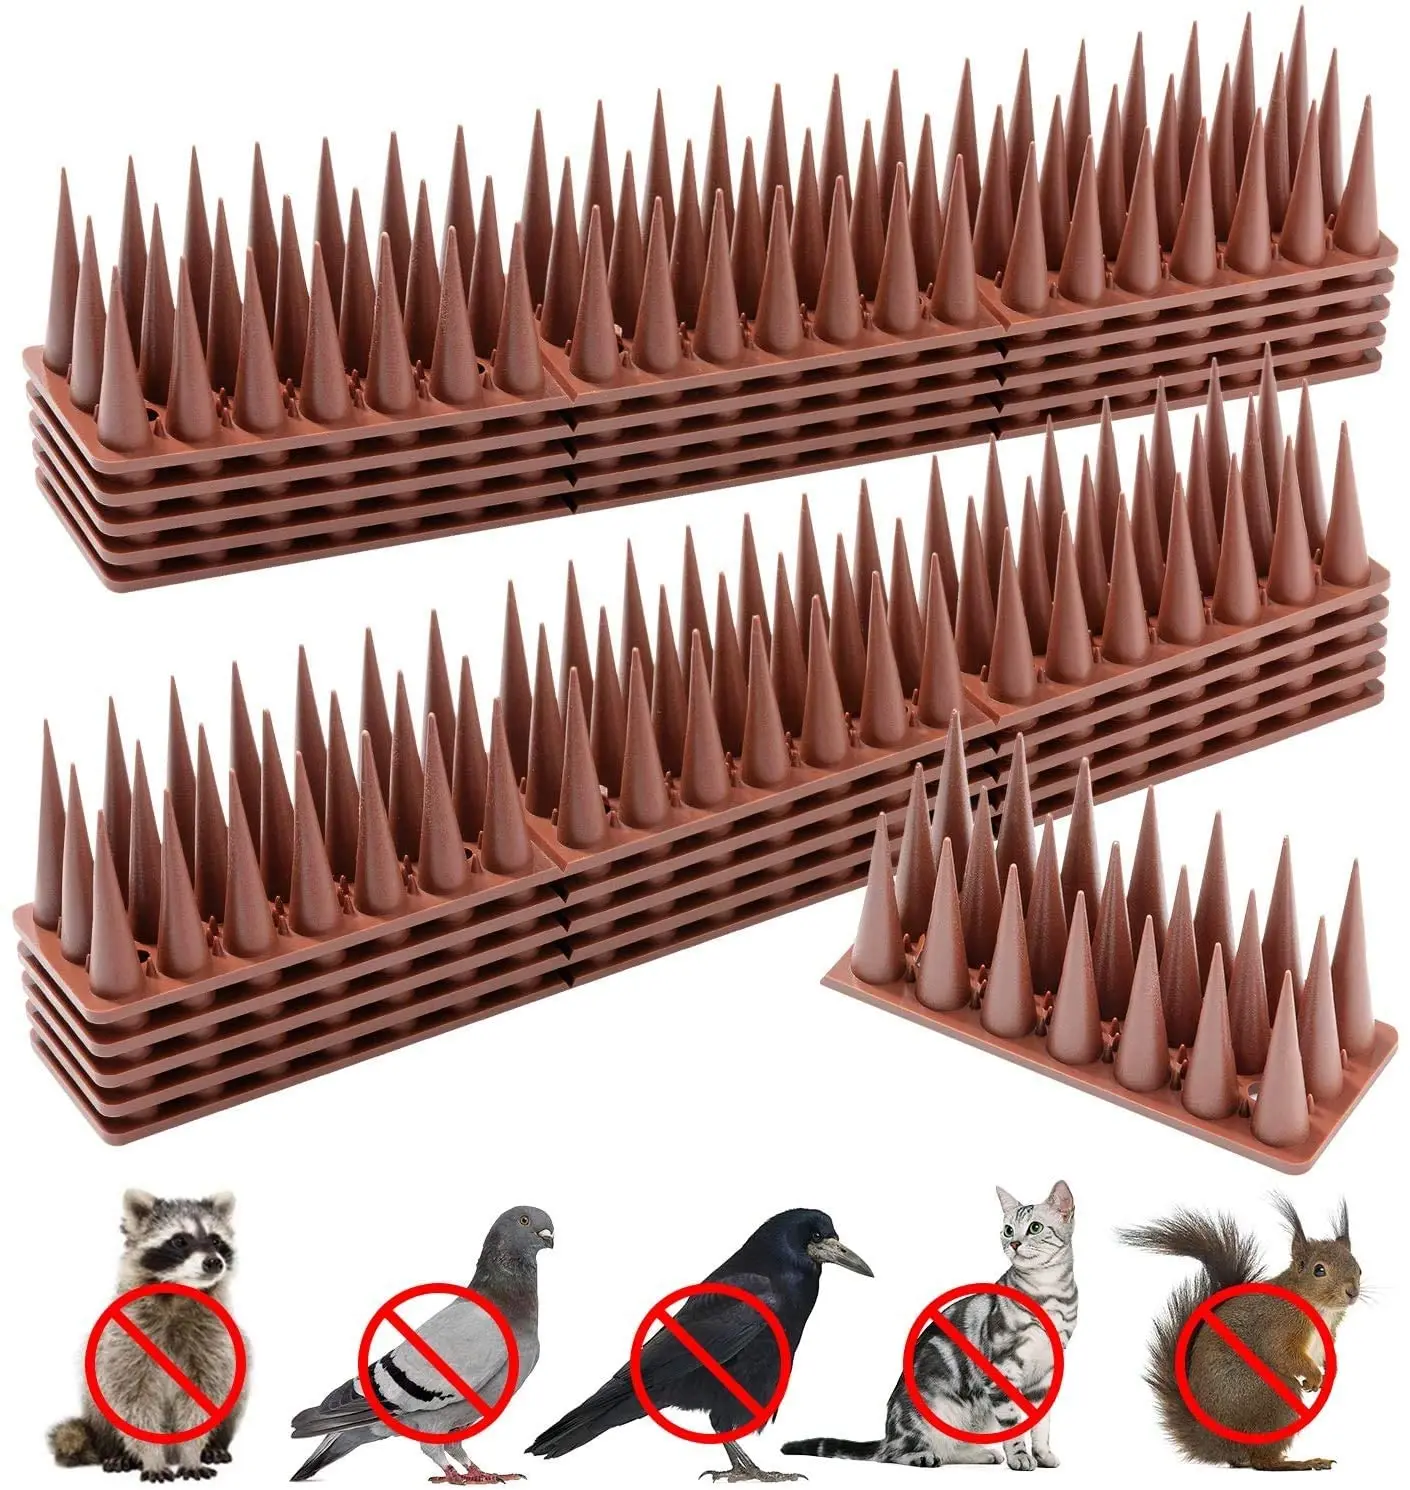 

pack of 20 Bird Deterrent Cat Repellent Prickle Bird Anti Climb Spikes Strips Wide Plastic Fence Wall Defender Spikes Strips Set, Brown